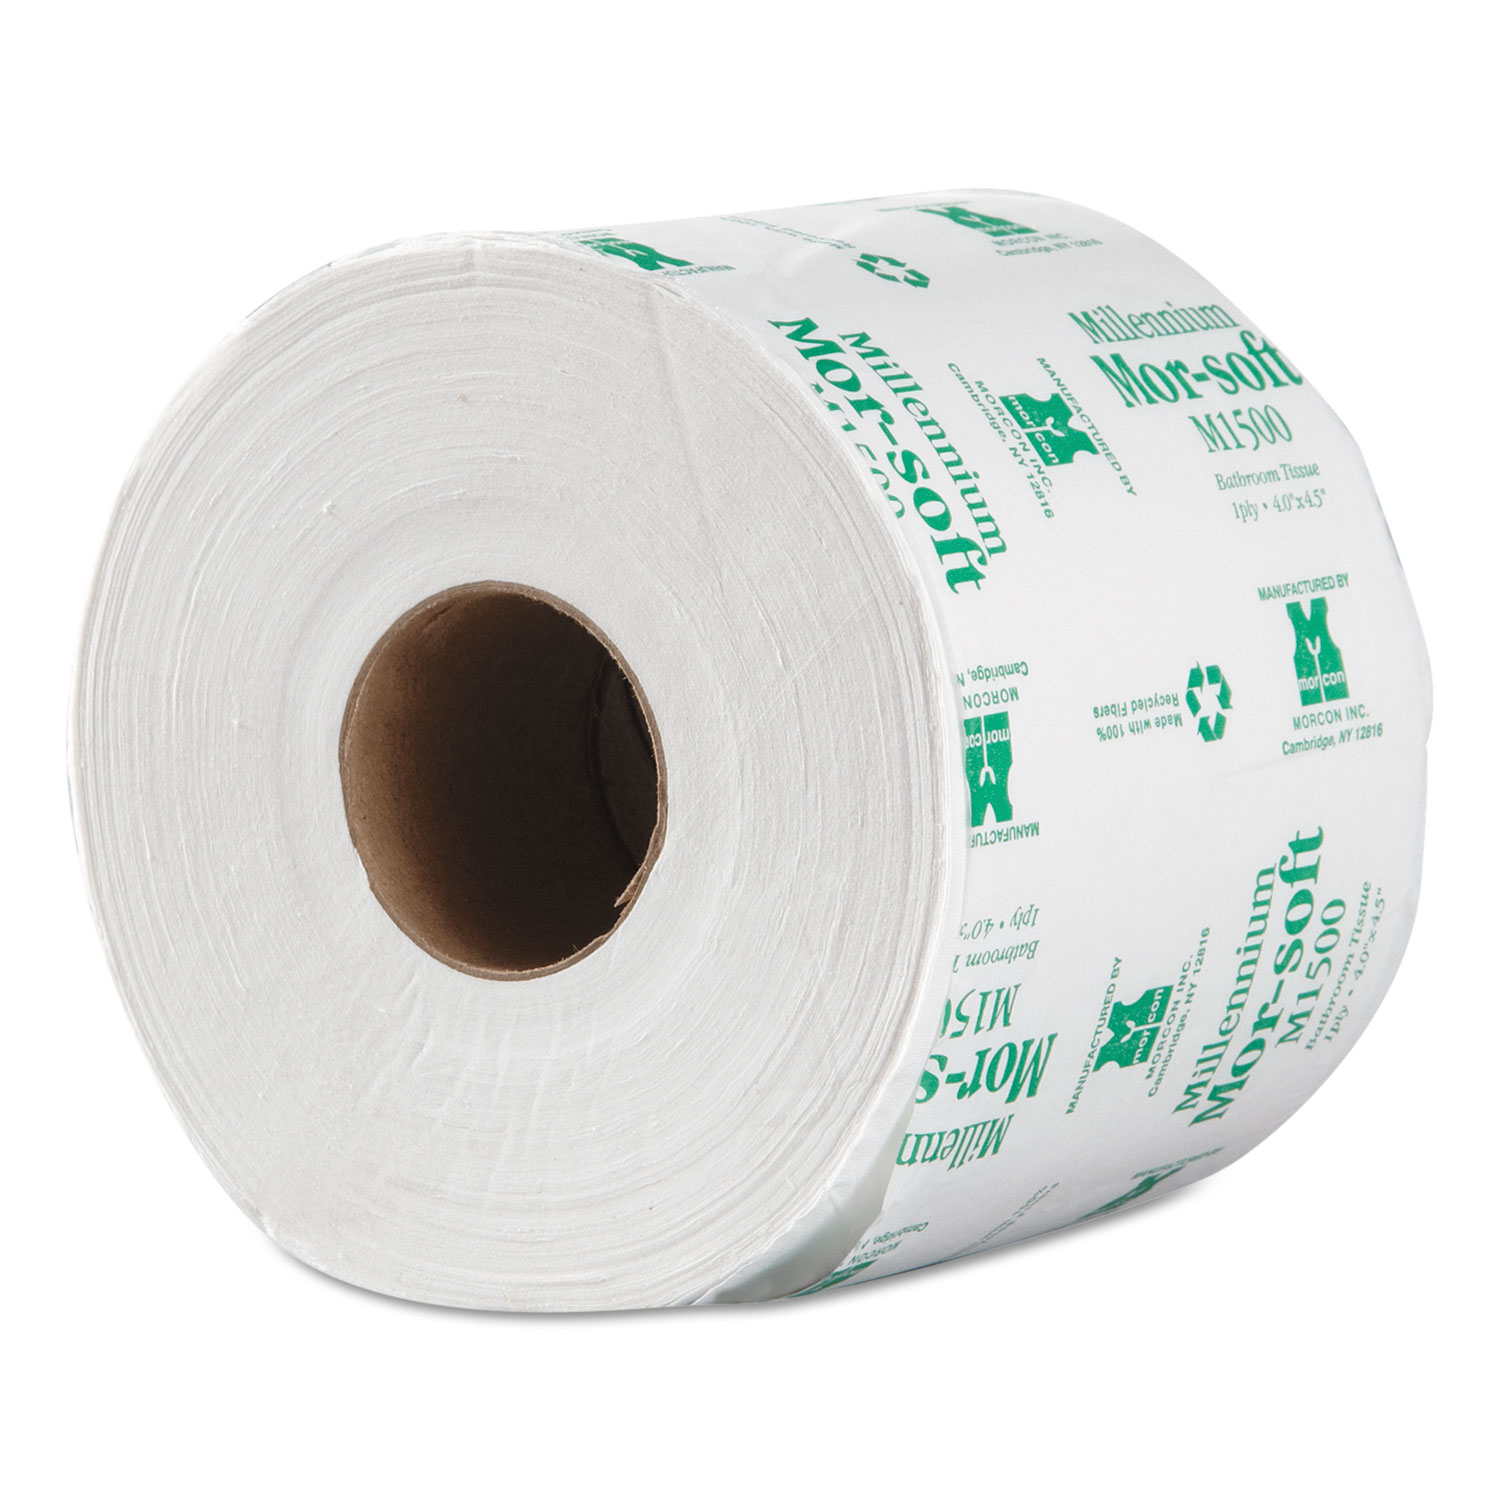  Morcon Tissue MOR M1500 Morsoft Controlled Bath Tissue, Septic Safe, 1-Ply, White, 3.9 x 4, 1500 Sheets/Roll, 48 Rolls/Carton (MORM1500) 